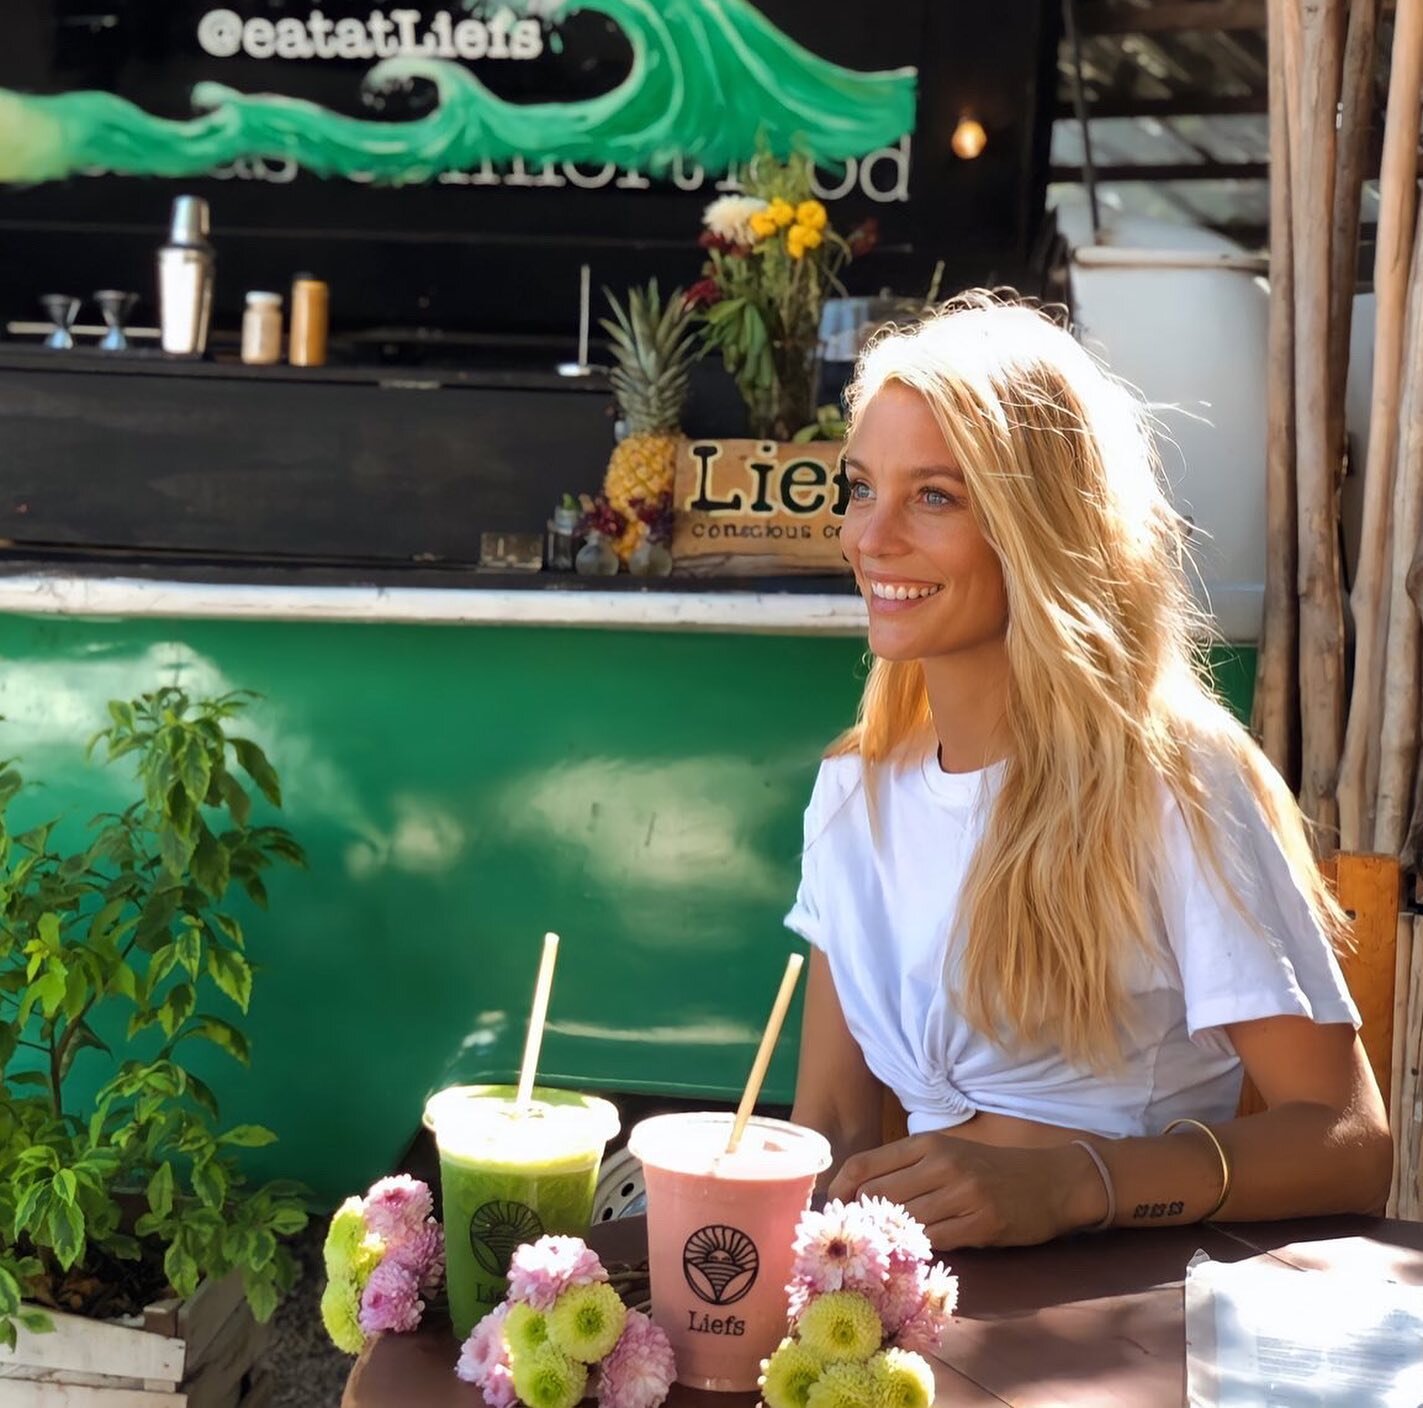 Our super smoothies and Fem flowers 💐 are a match made in heaven at Liefs! Which one would you choose? (Fem not included) 😉

#tulumeats #tulumyoga #tulumrestaurante #veganrecipes #smoothierecipes #tulumvibes #veganbreakfast